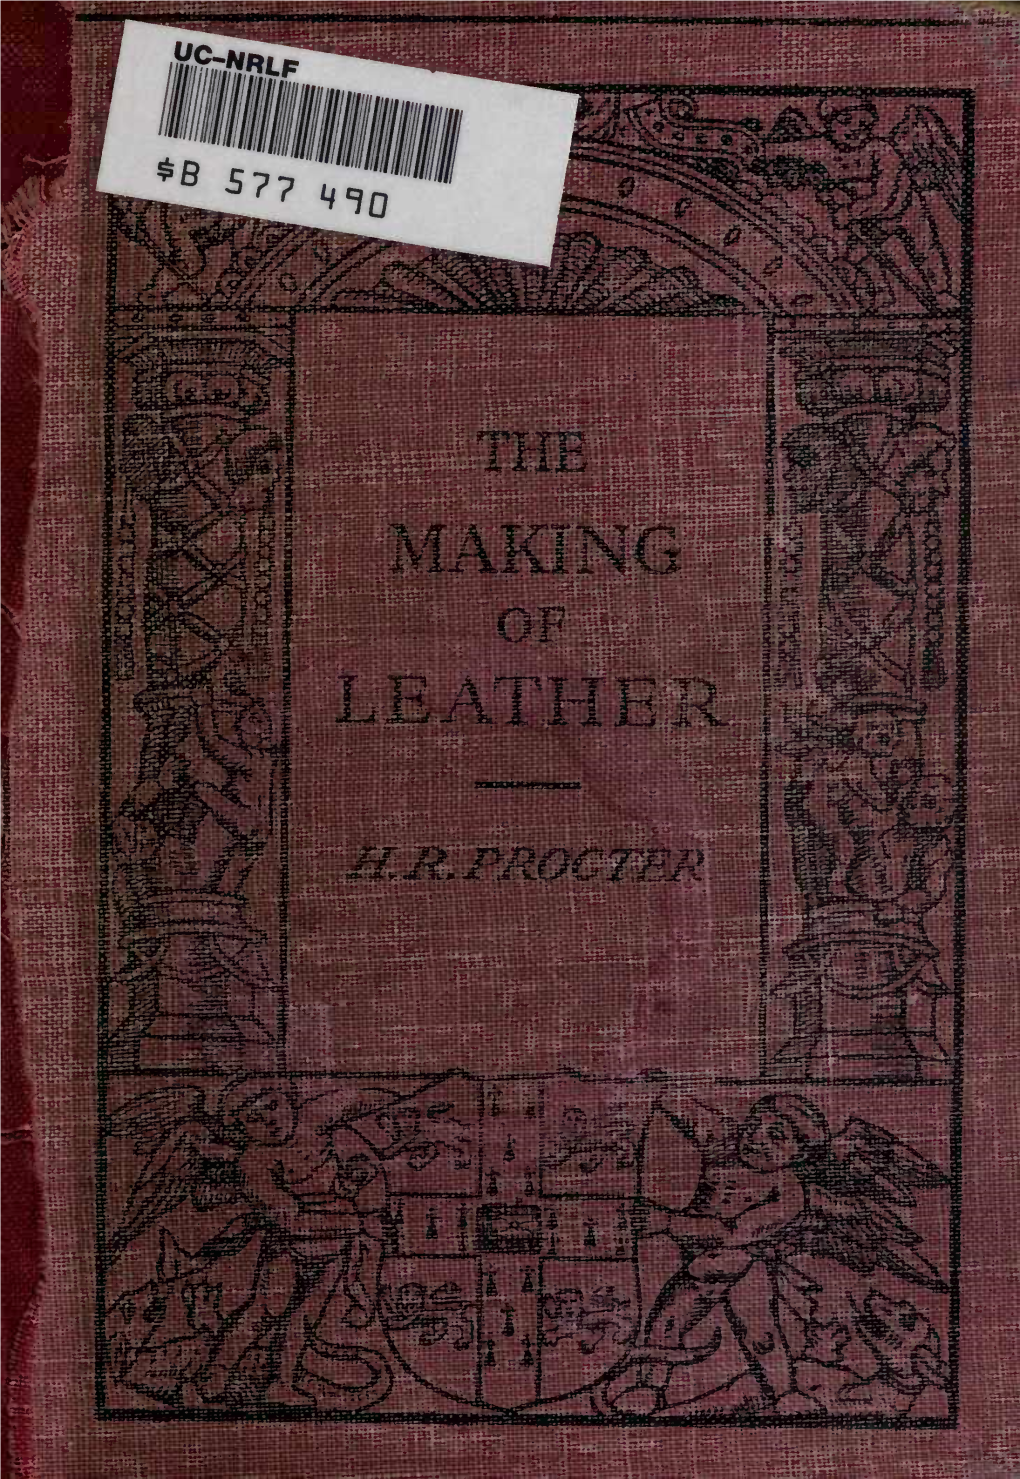 The Making of Leather (1914)